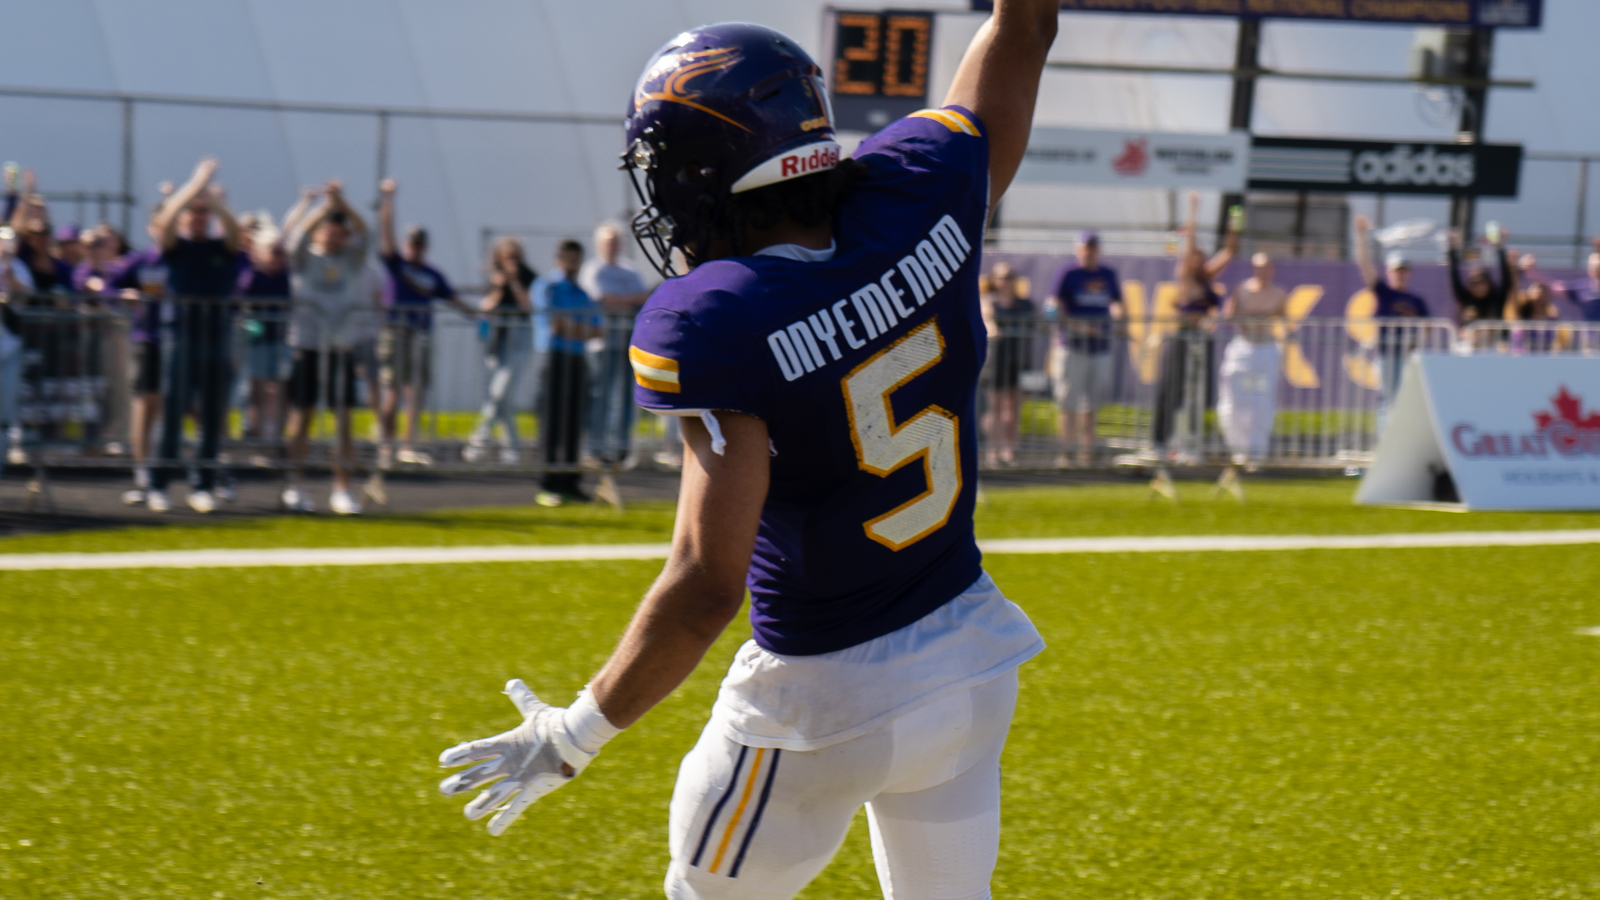 Action photo of Laurier football player Ife Onyemenam holding up the football while running into the end zone